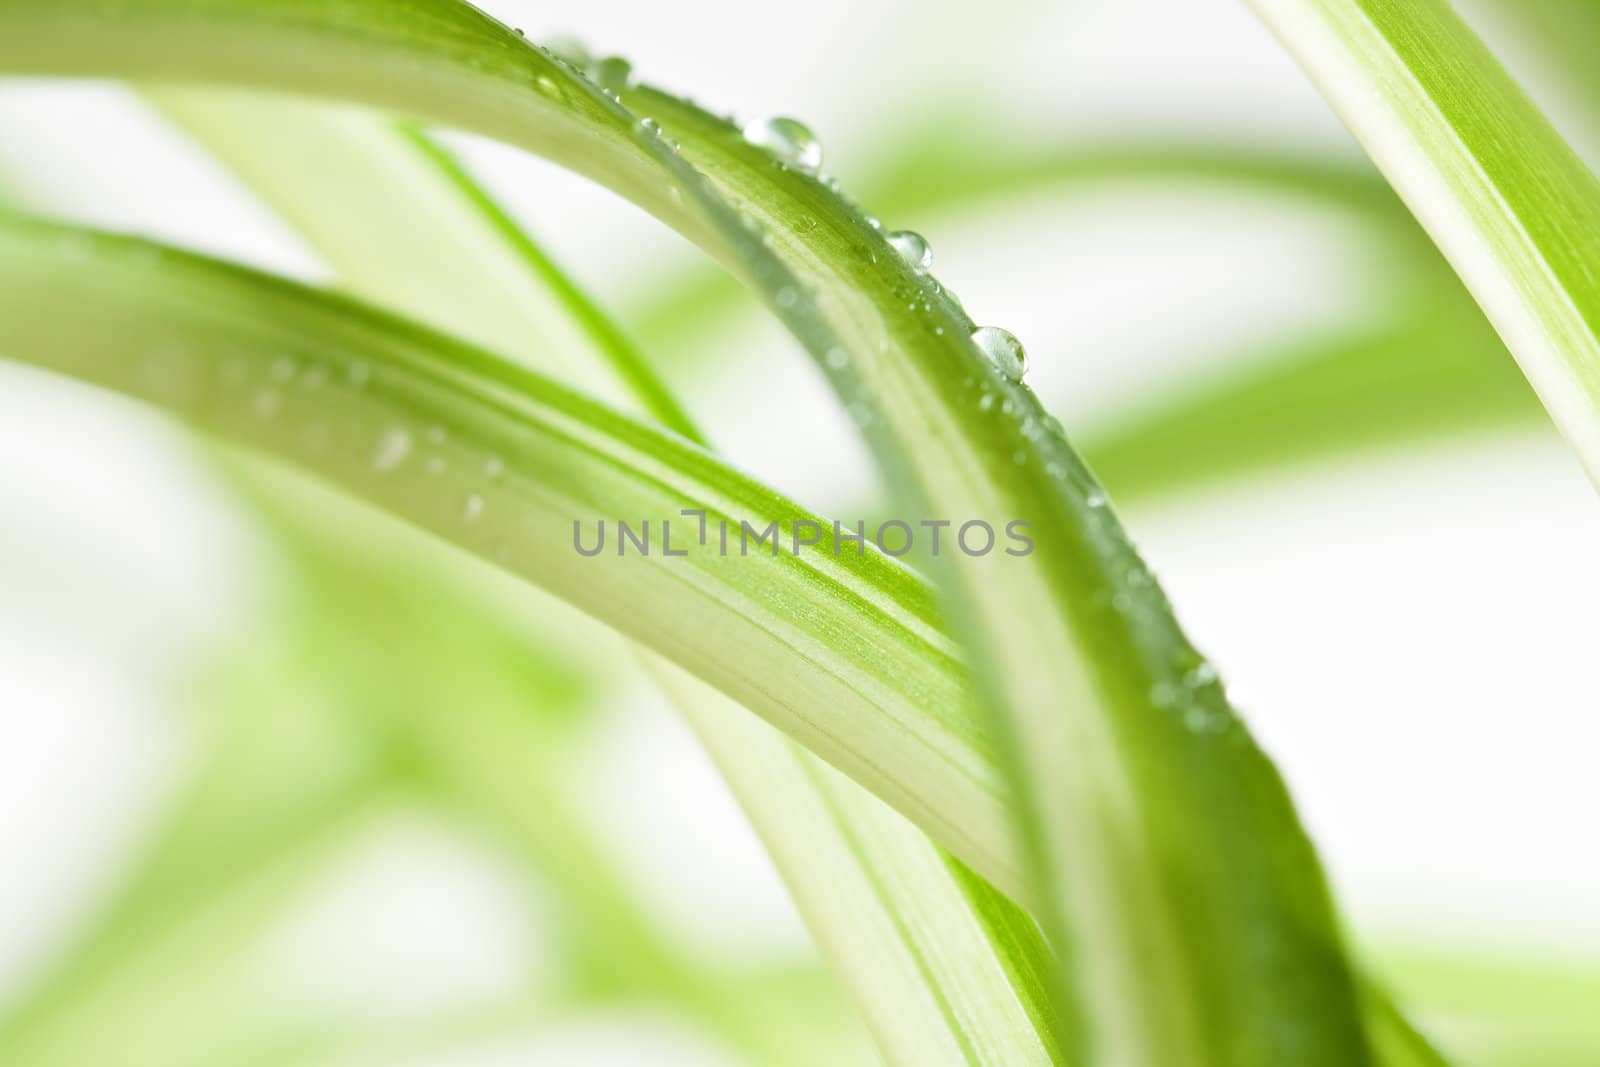 Water drops on a plant in front of a white background